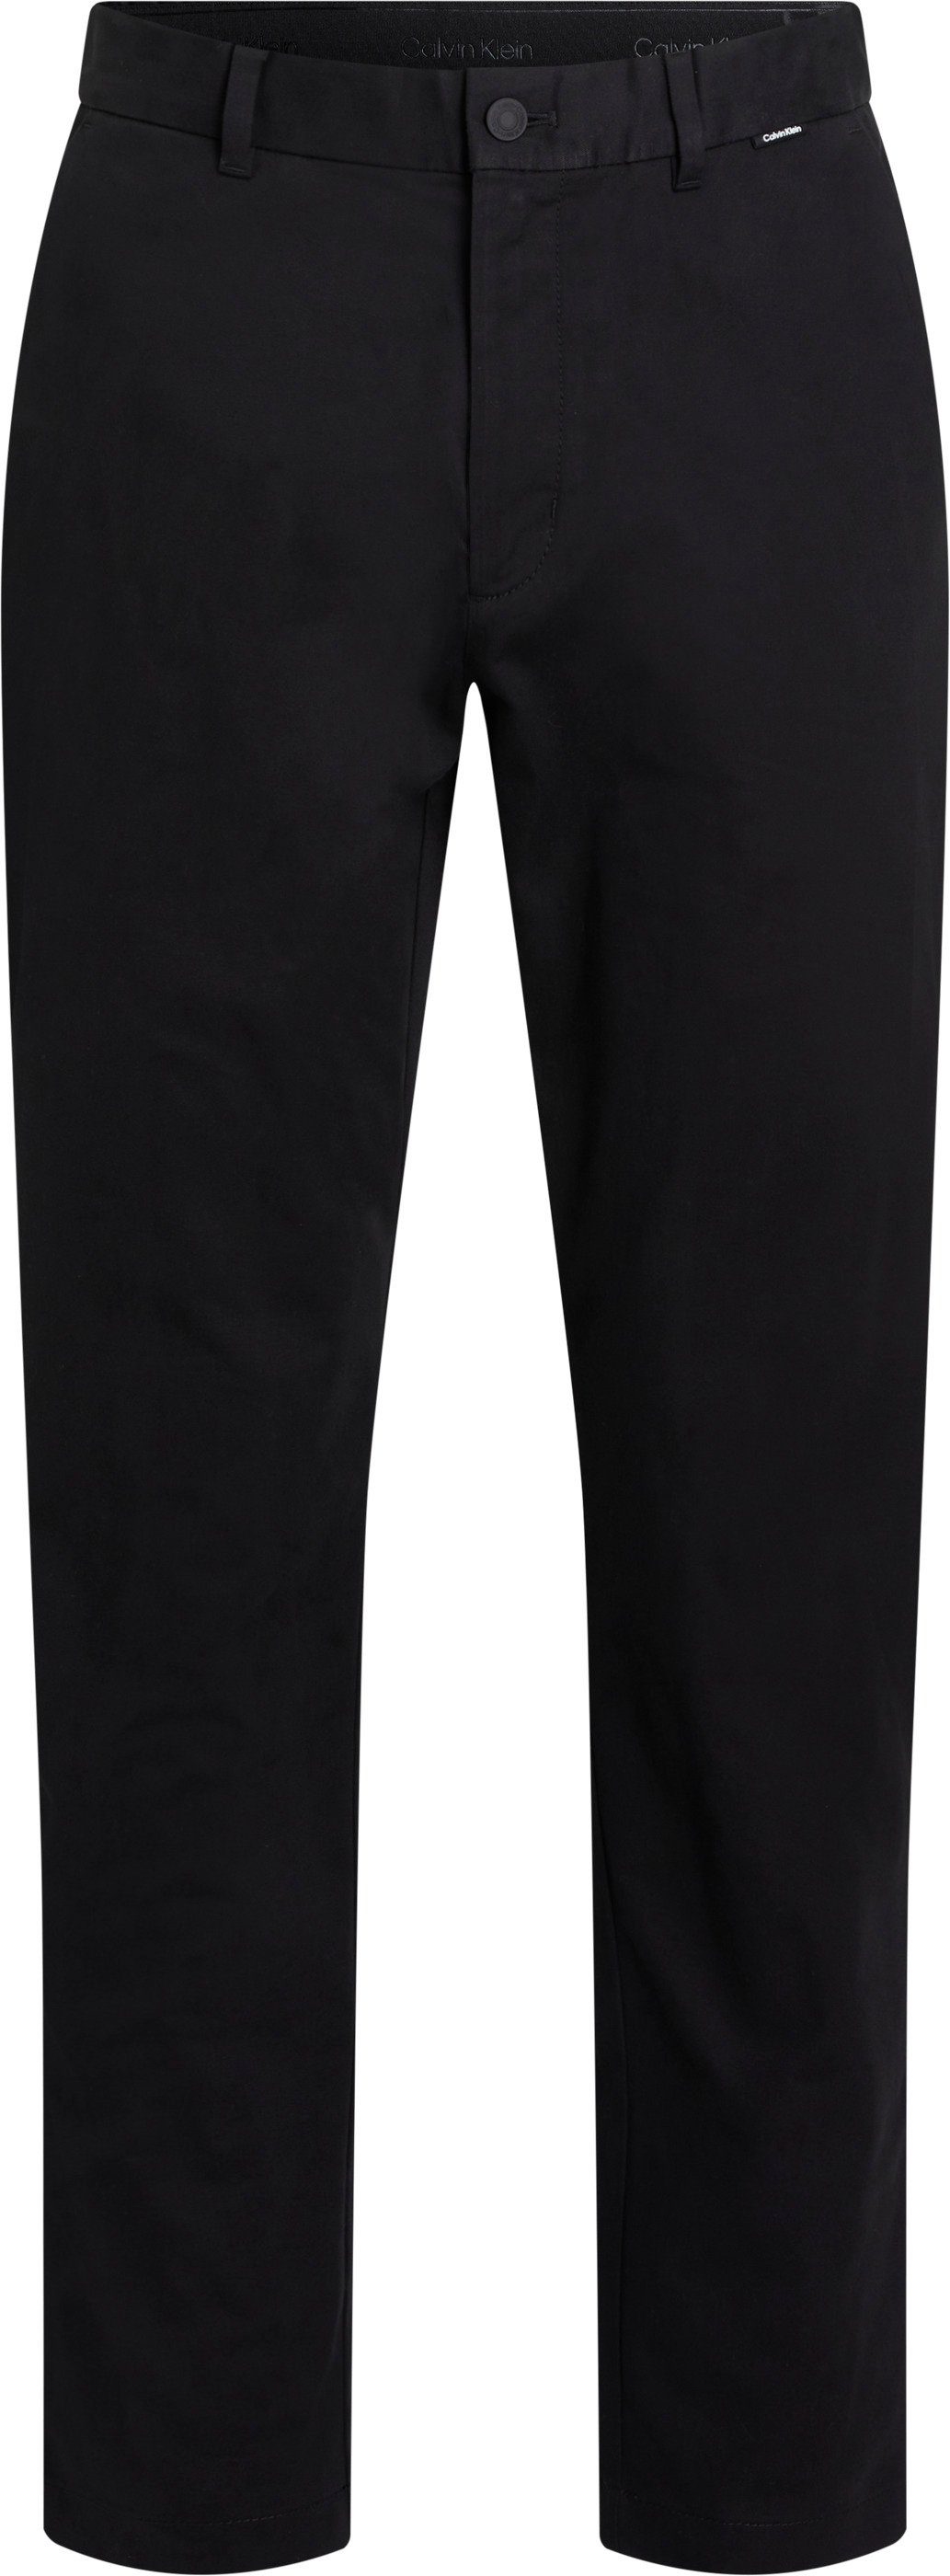 PANT MODERN Calvin TAPERED Klein Stretch-Hose TWILL